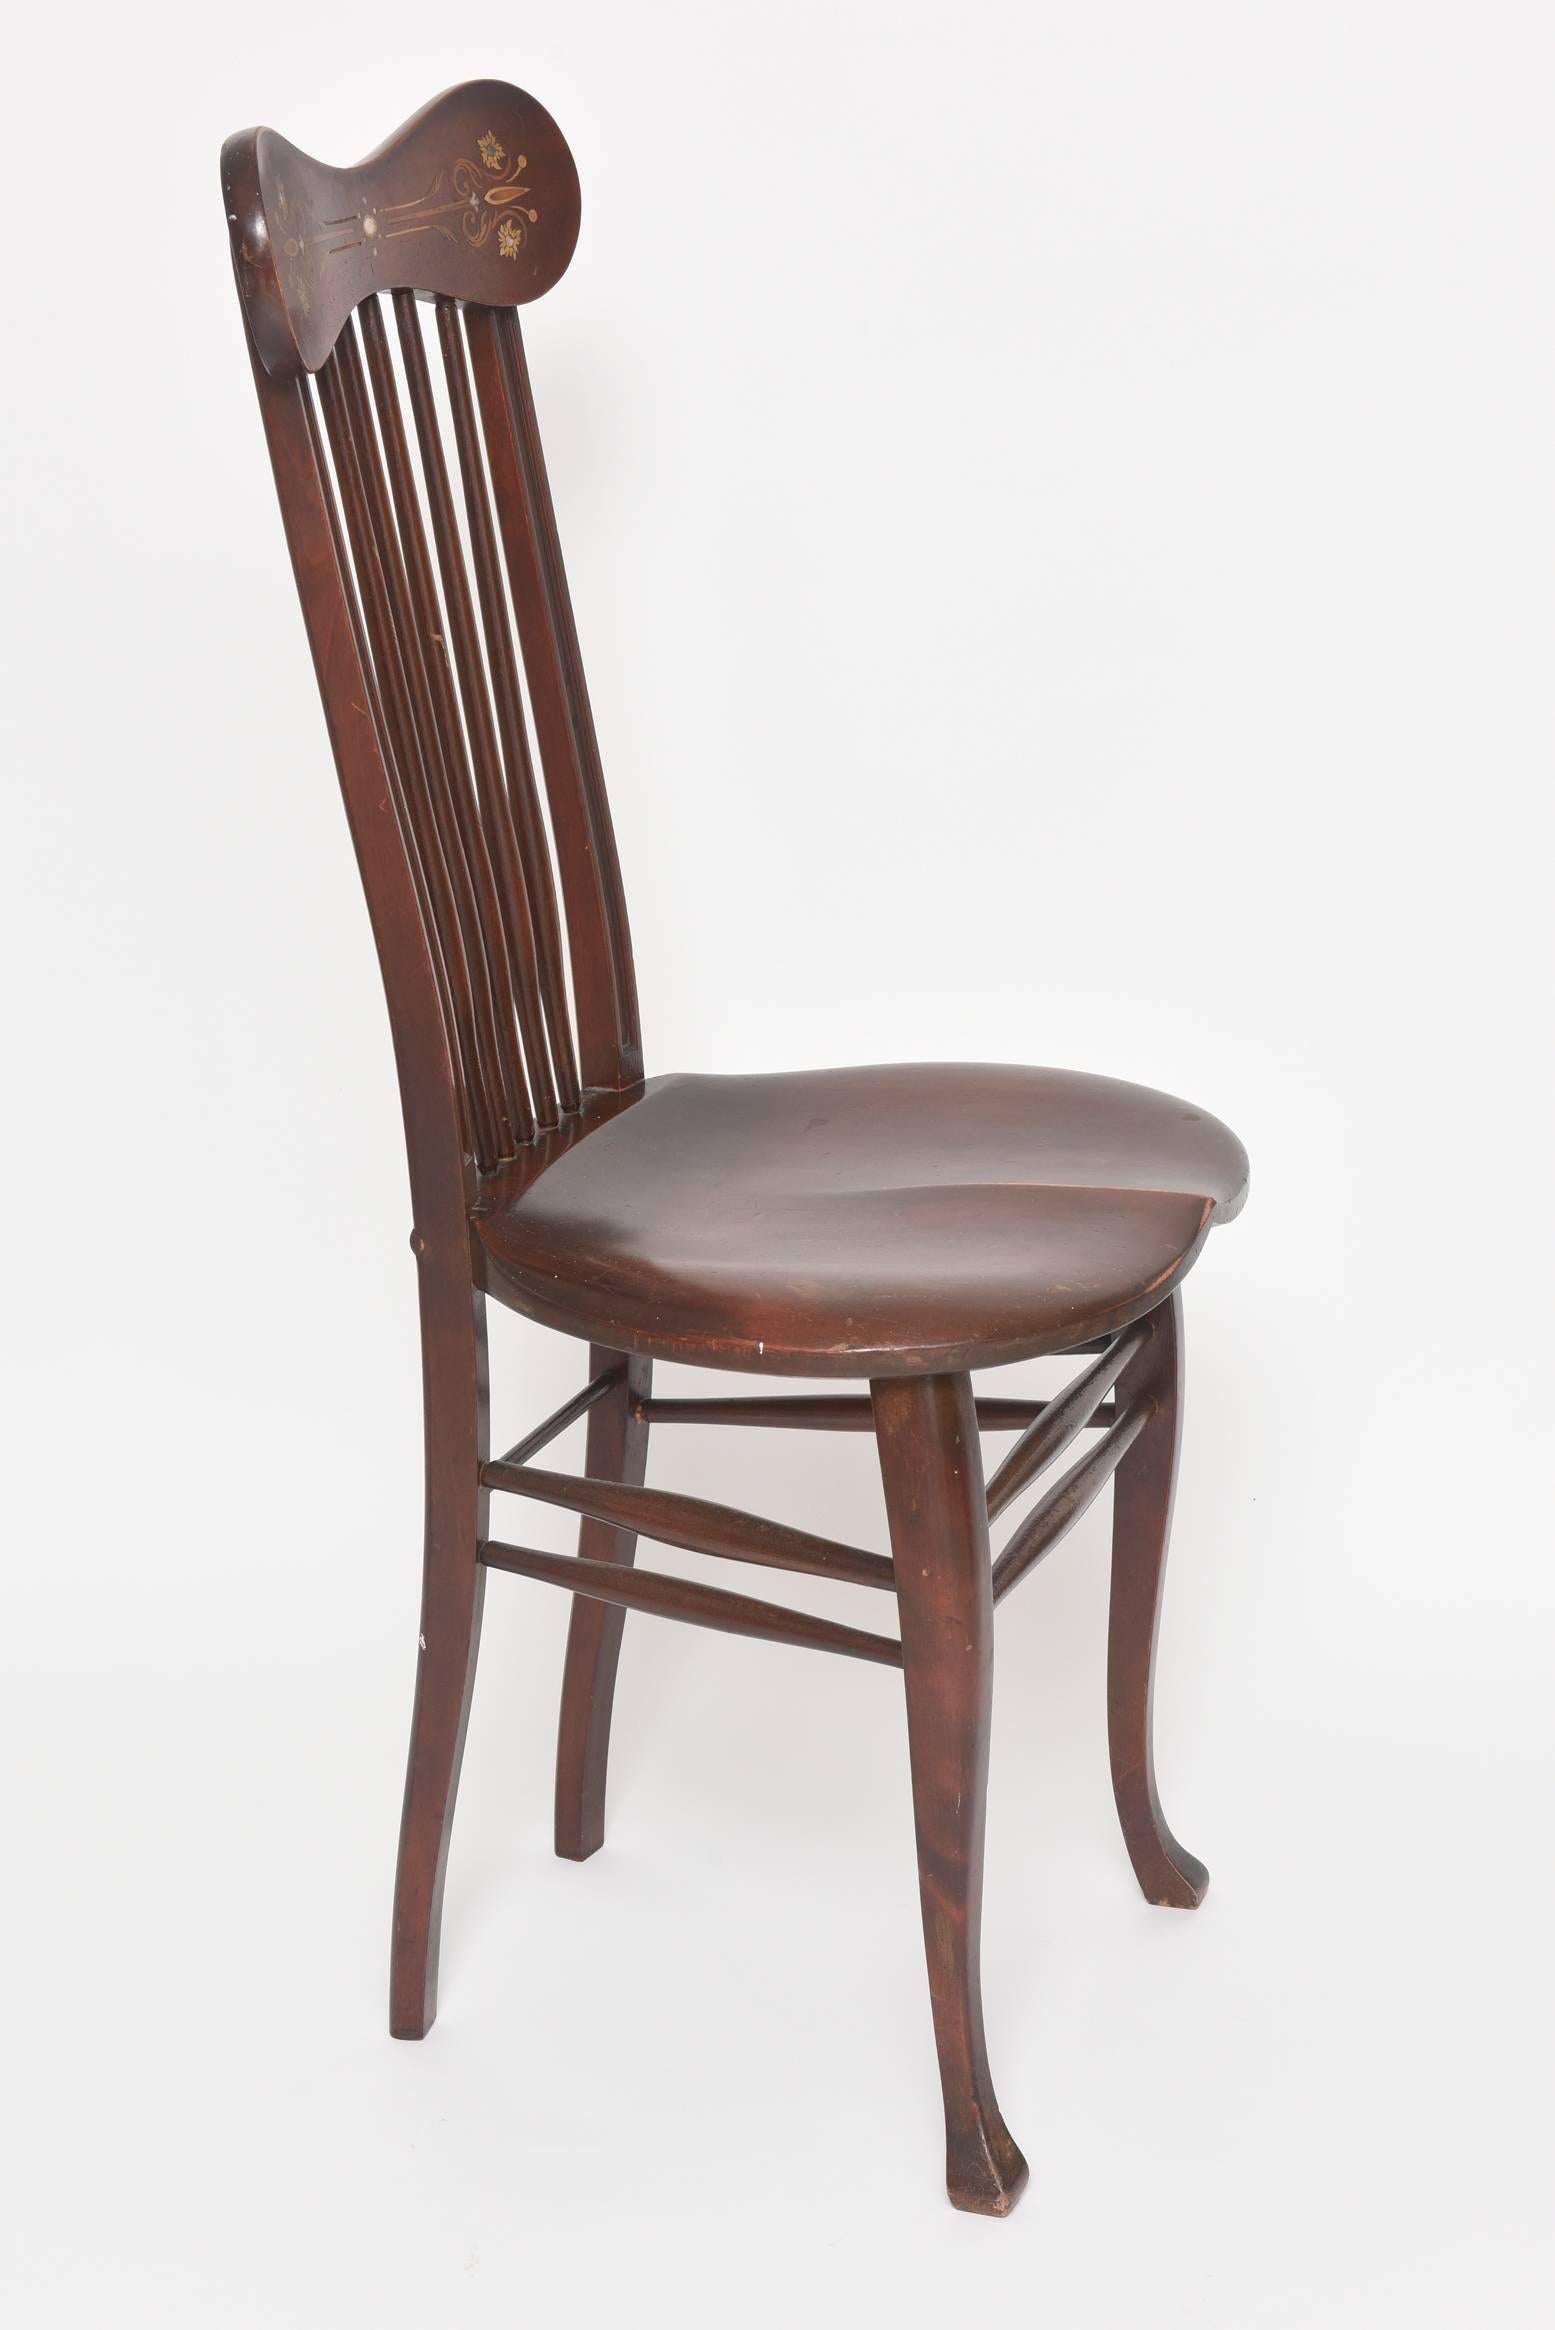 Antique Mother-of-Pearl Inlaid Windsor Side Chair Spindle Back Saddle Seat In Good Condition For Sale In Miami Beach, FL